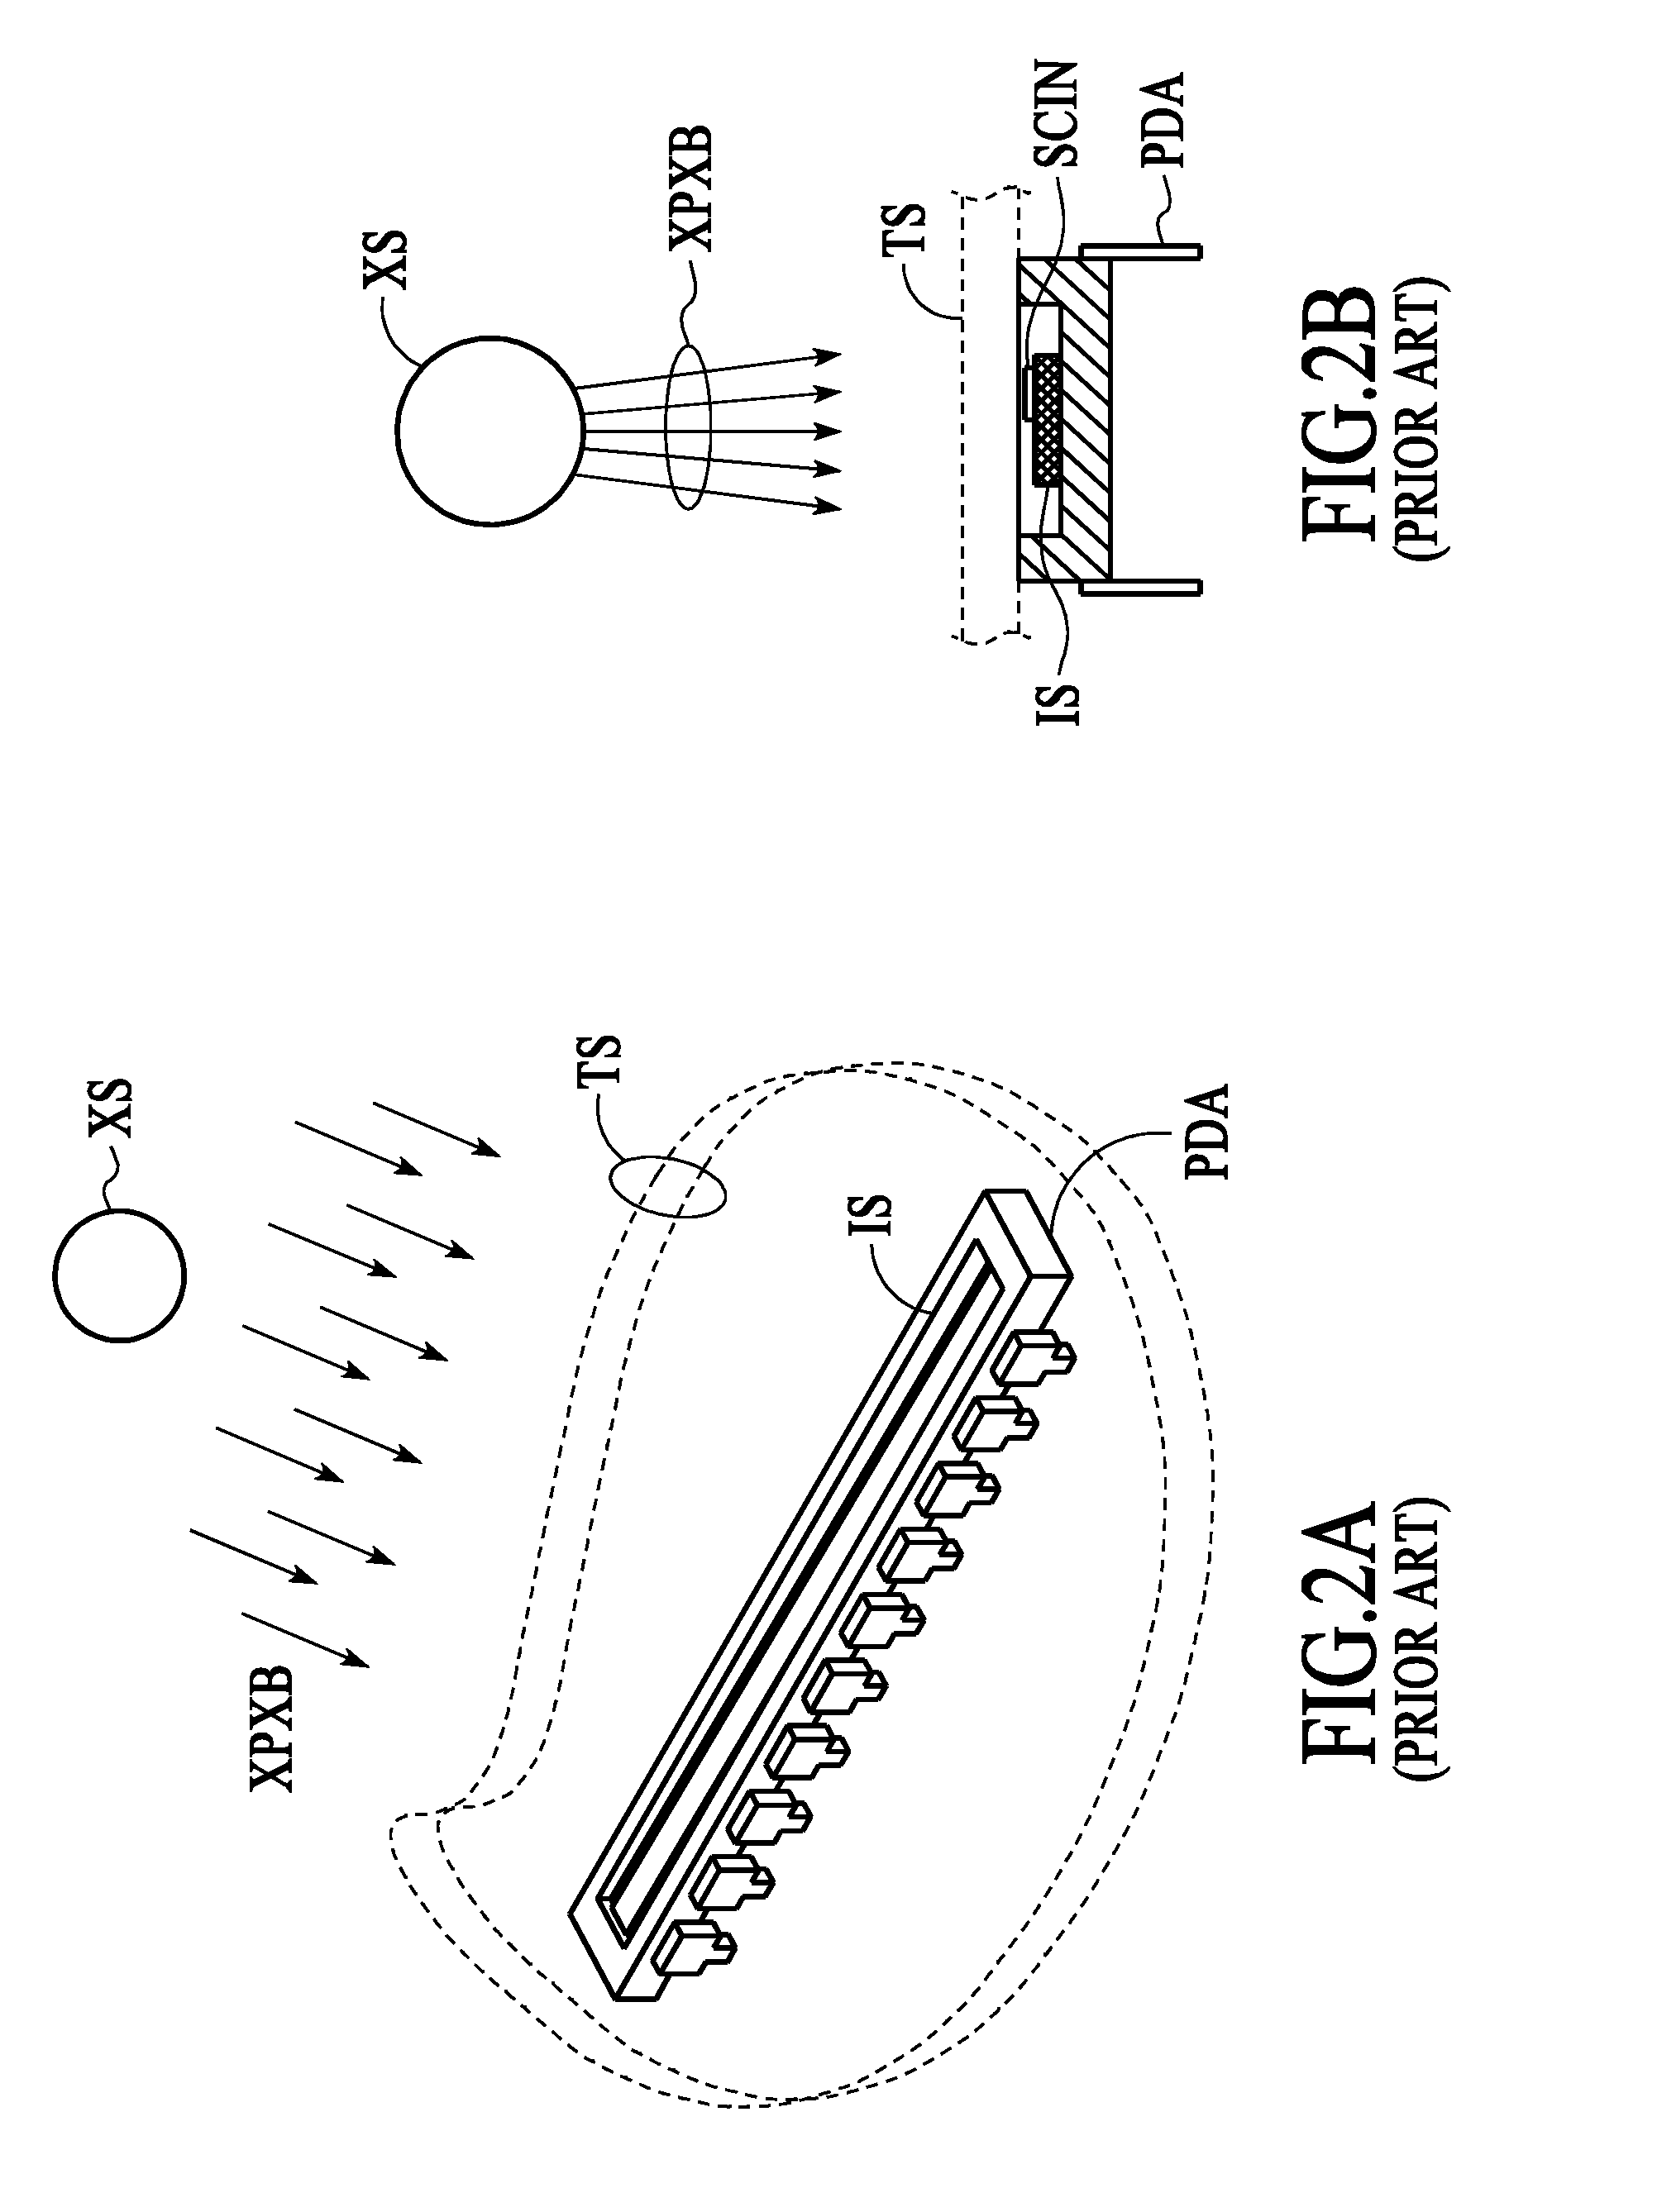 Linear X-ray detector using fiber optic face plate to alter optical path